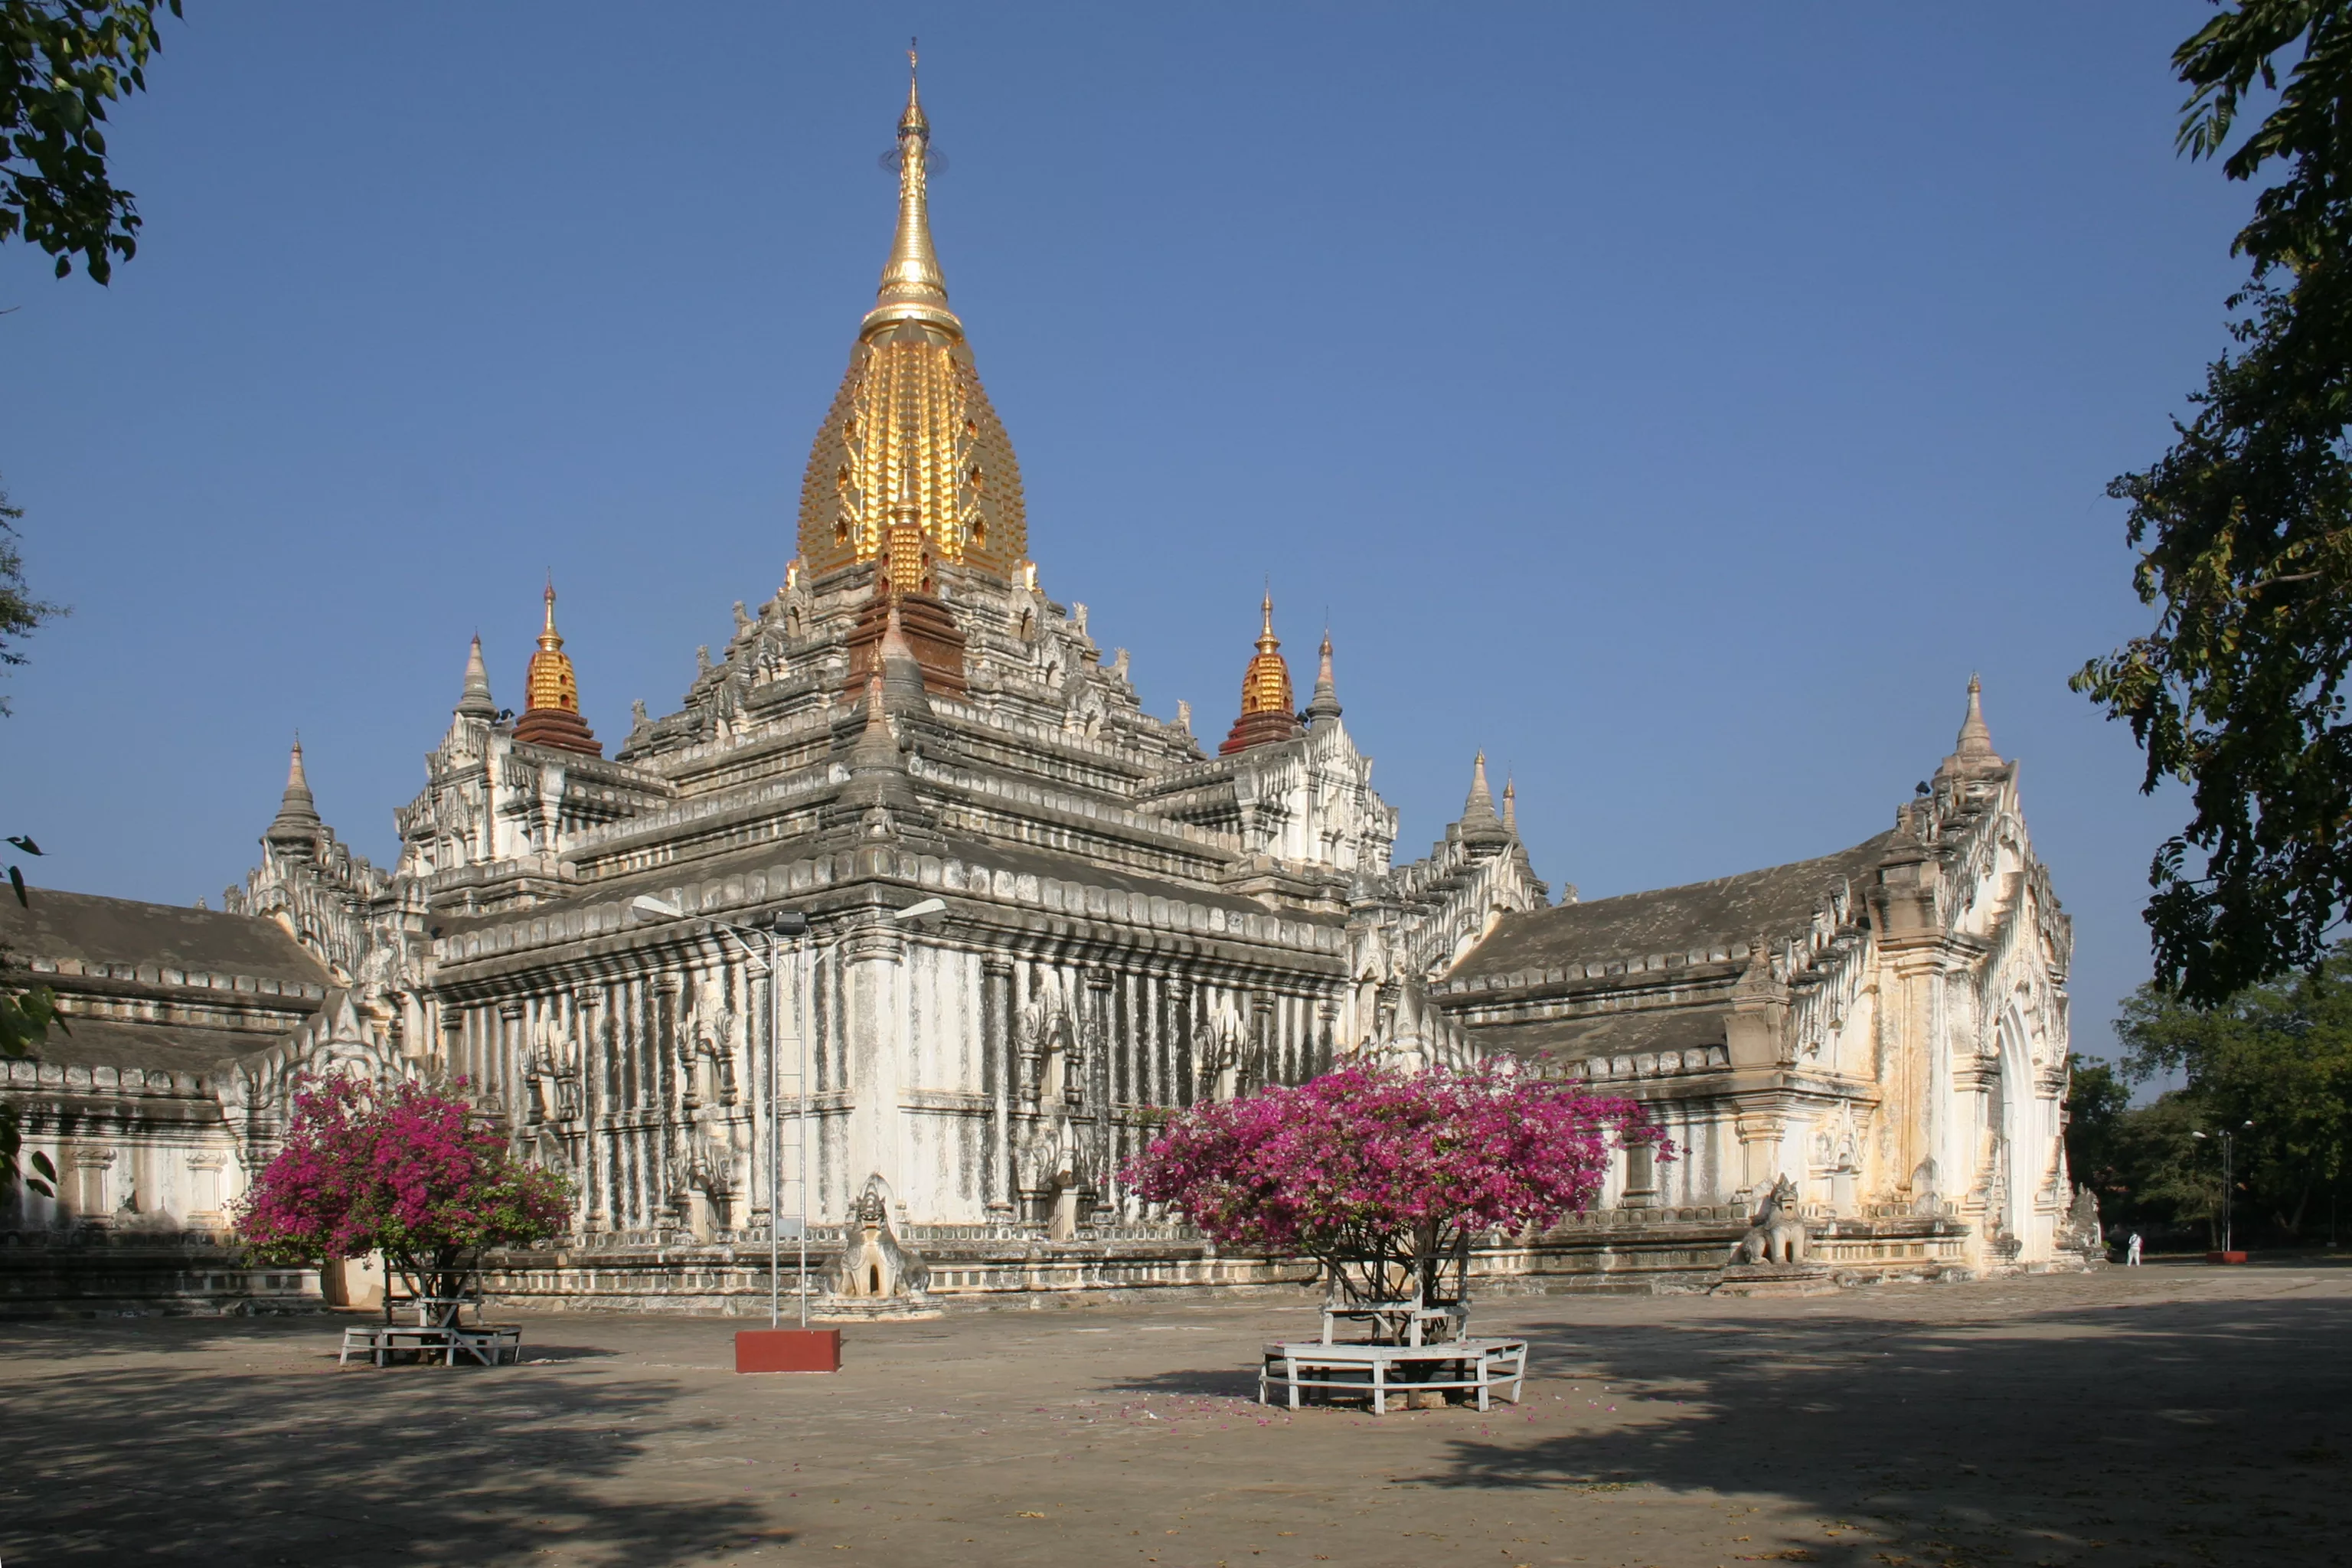 Ananda in Myanmar, Central Asia | Architecture - Rated 3.8